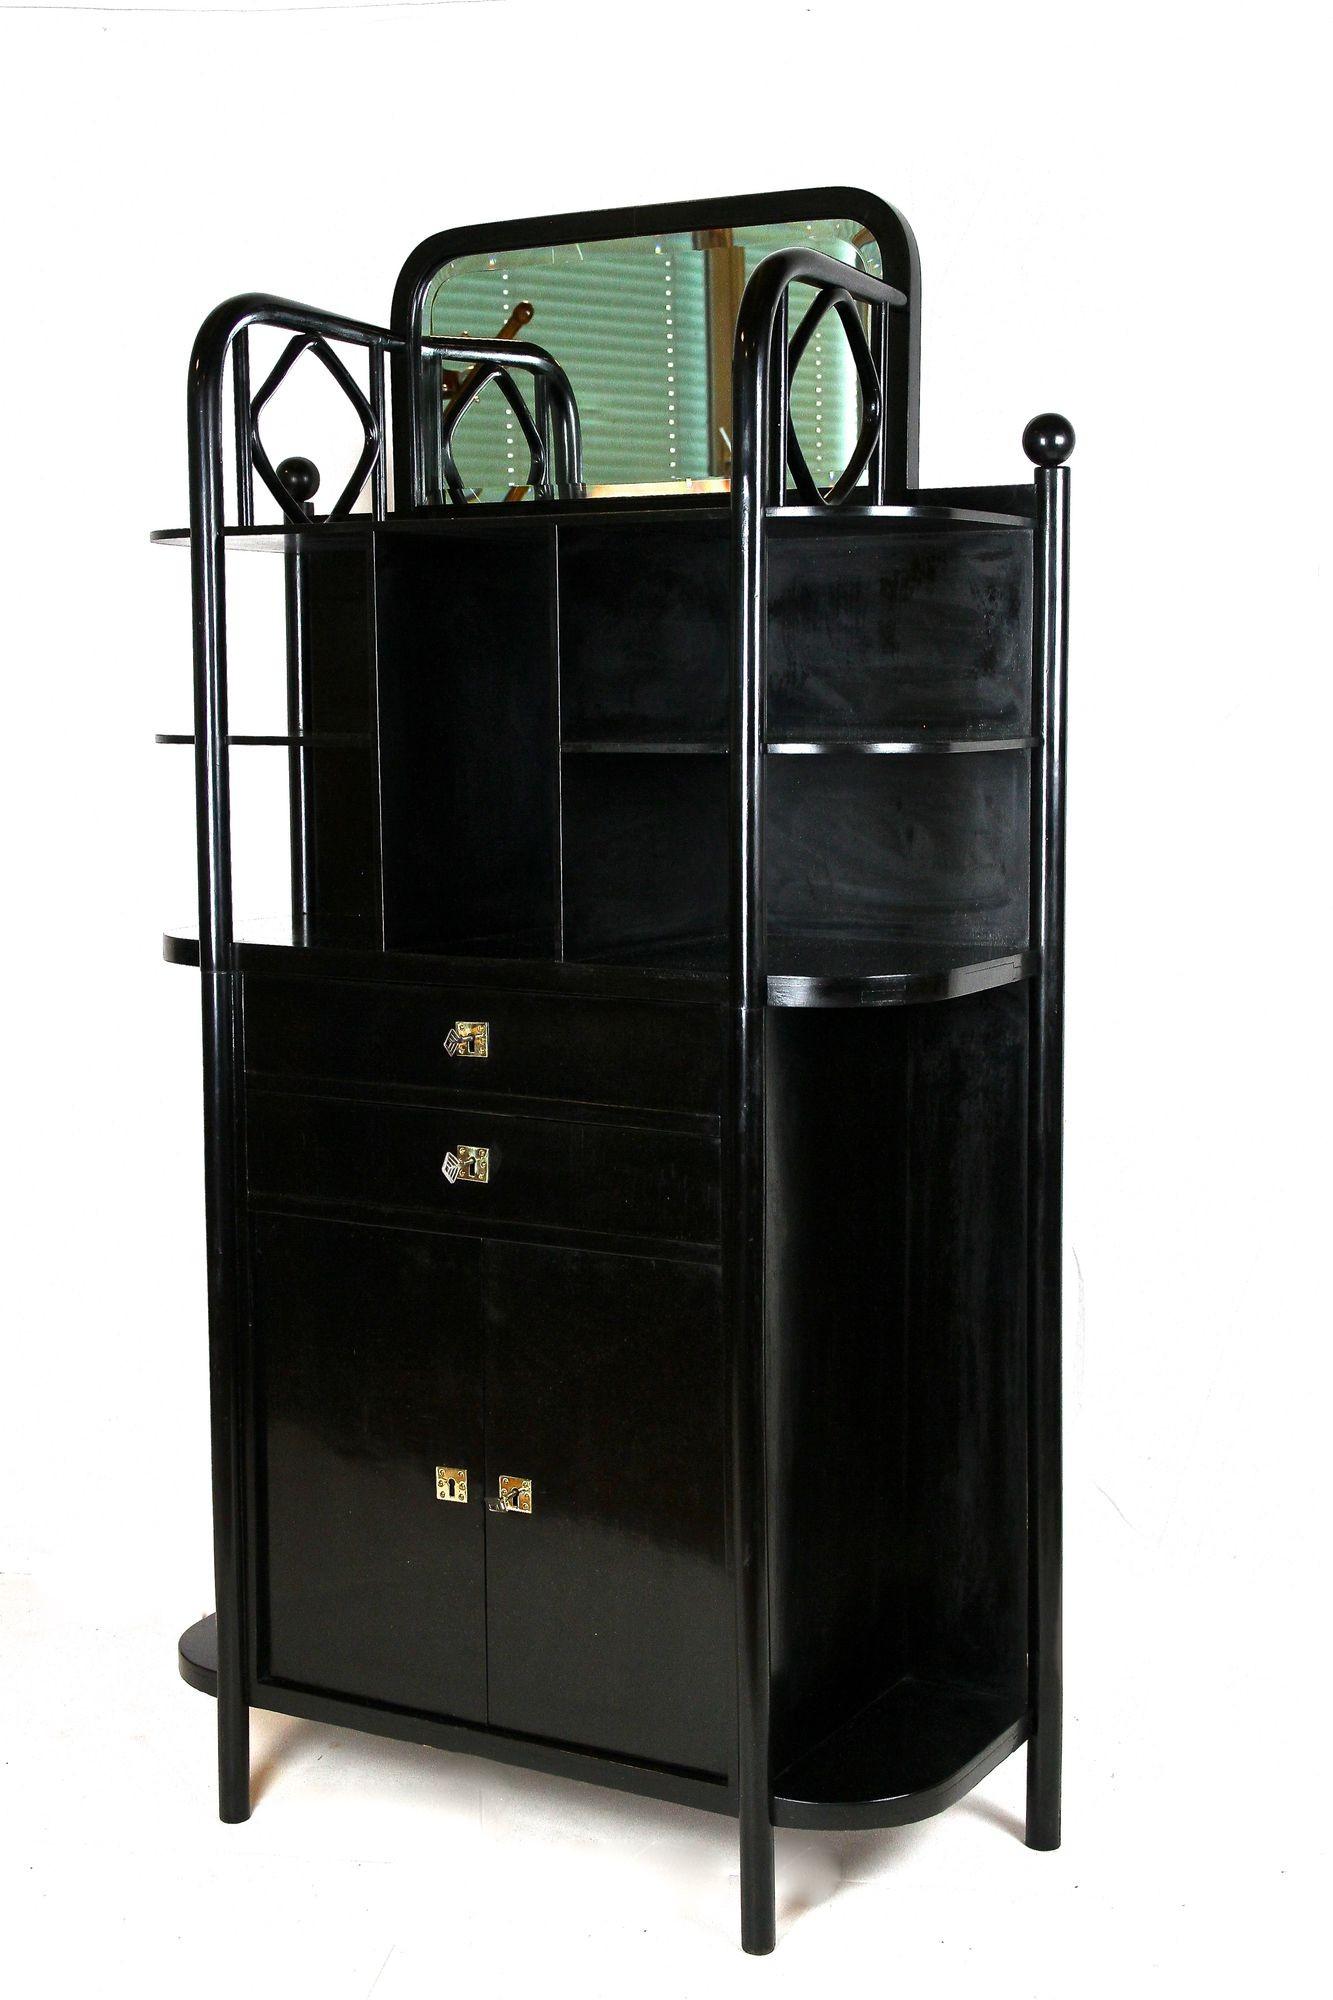 Black Art Nouveau Display Cabinet by Josef Hoffmann for Thonet, AT ca. 1905 For Sale 2